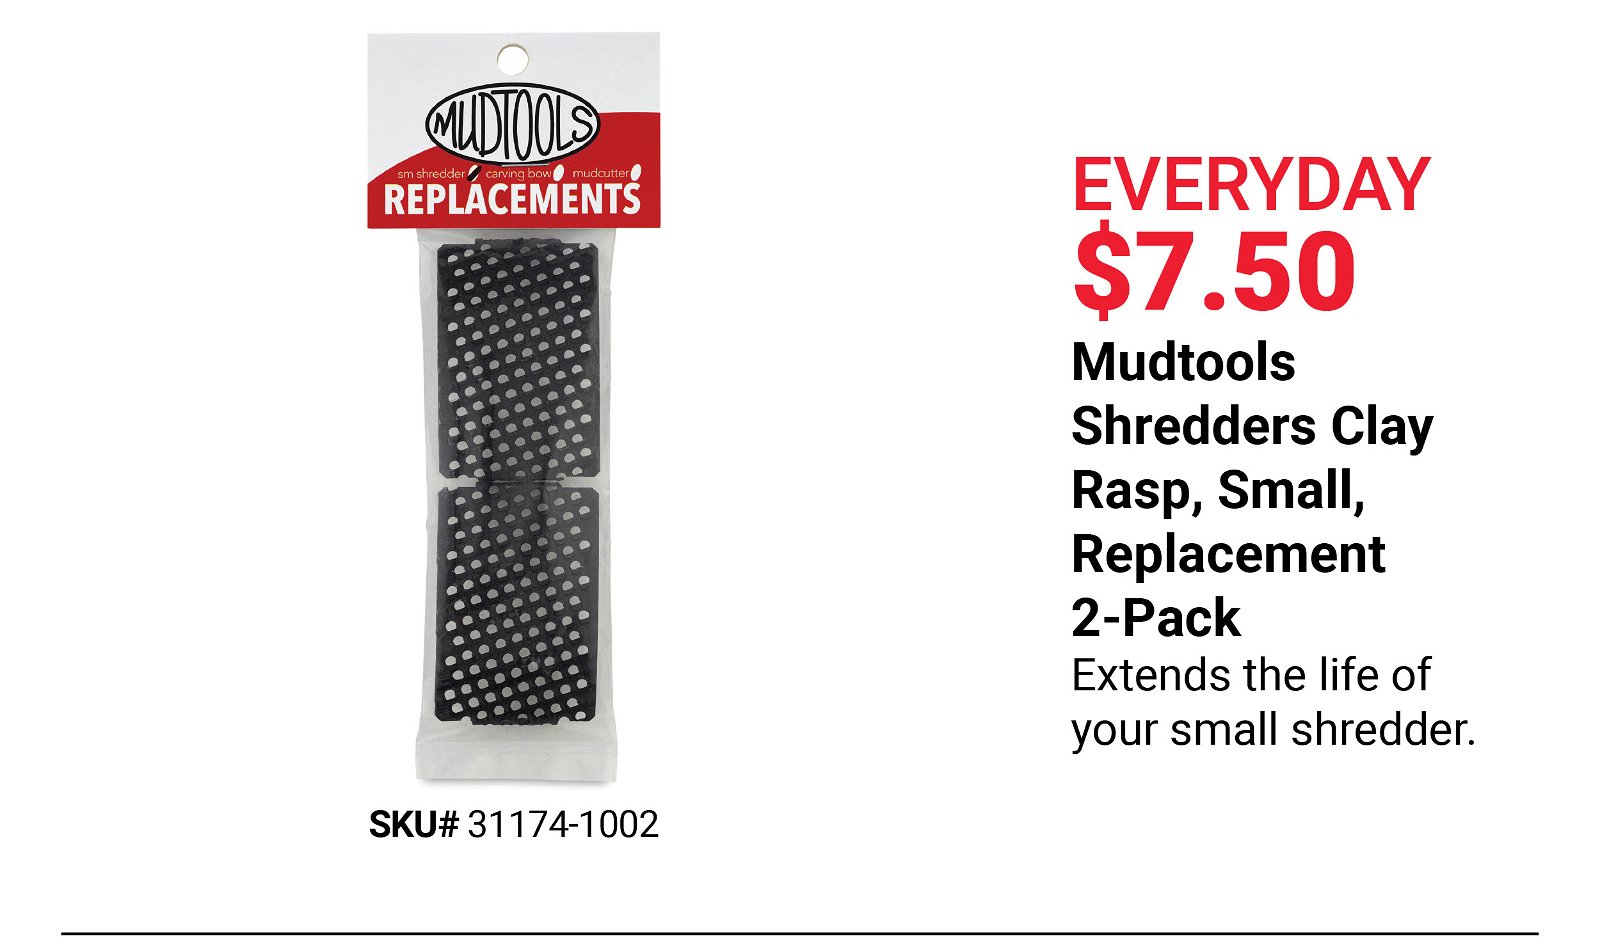 Everyday \\$7.50: Mudtools Shredders Clay Rasp, Small, Replacement 2-Pack